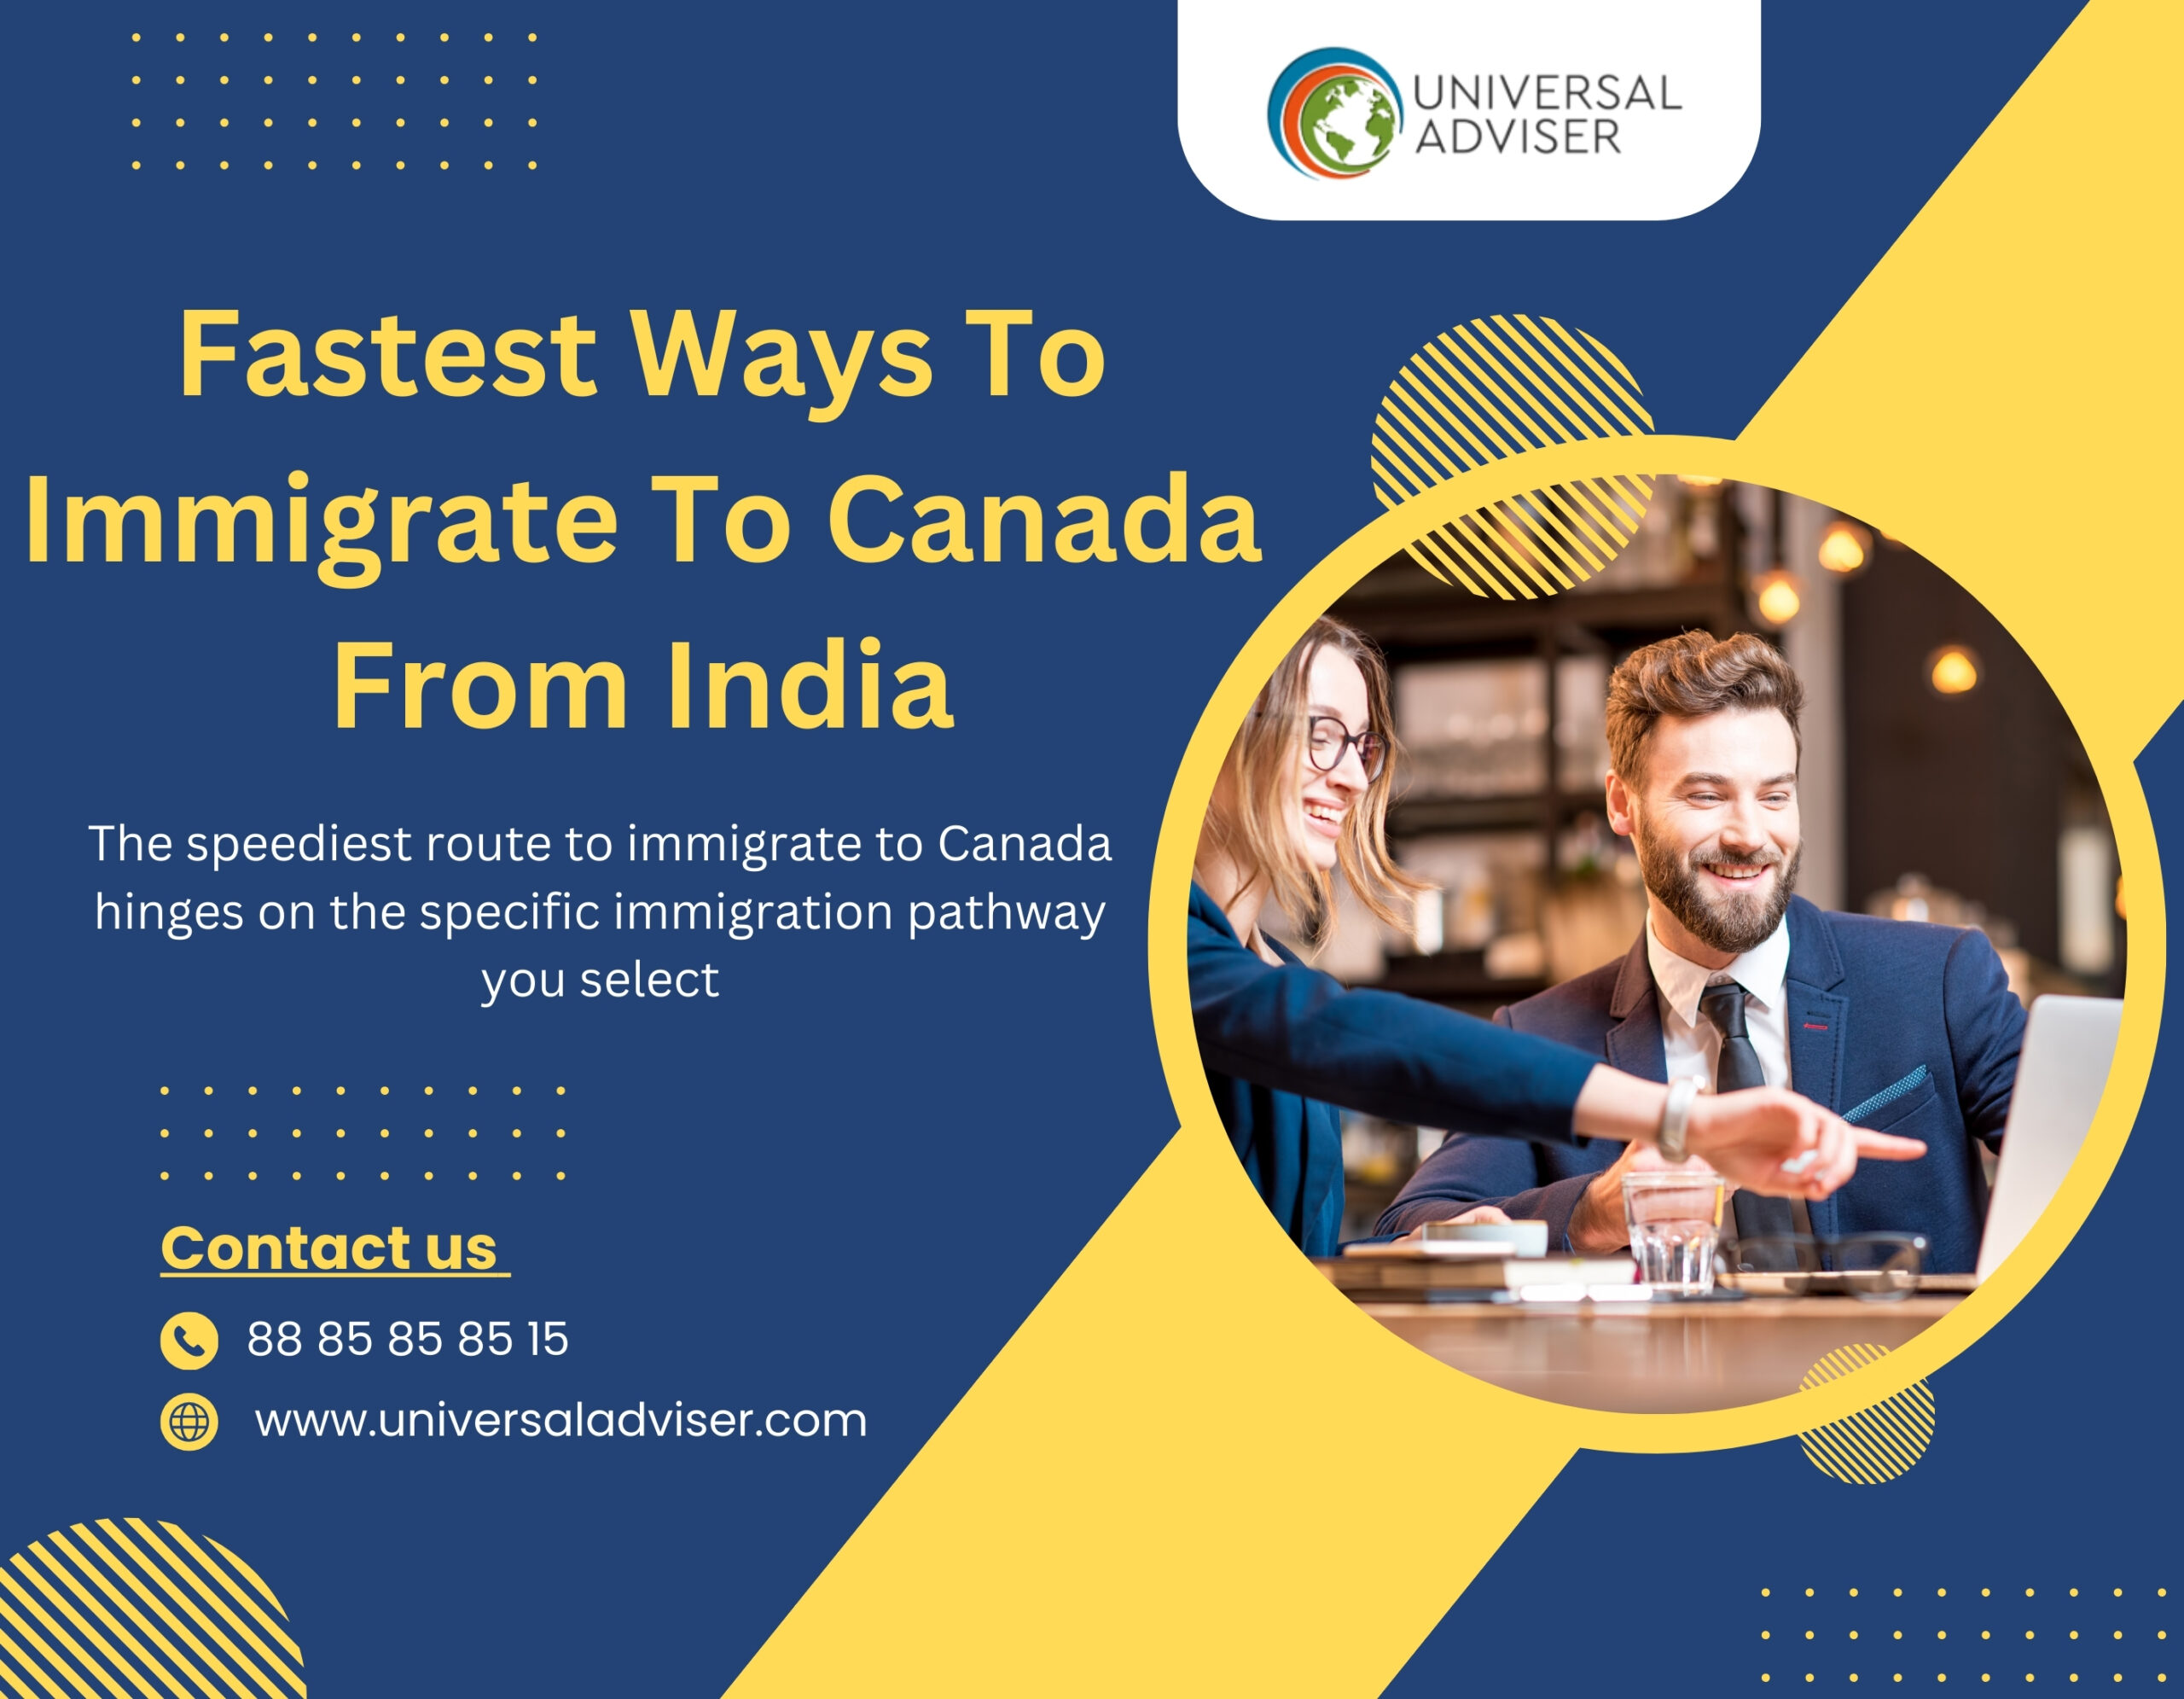 Fastest Ways to Immigrate To Canada from India